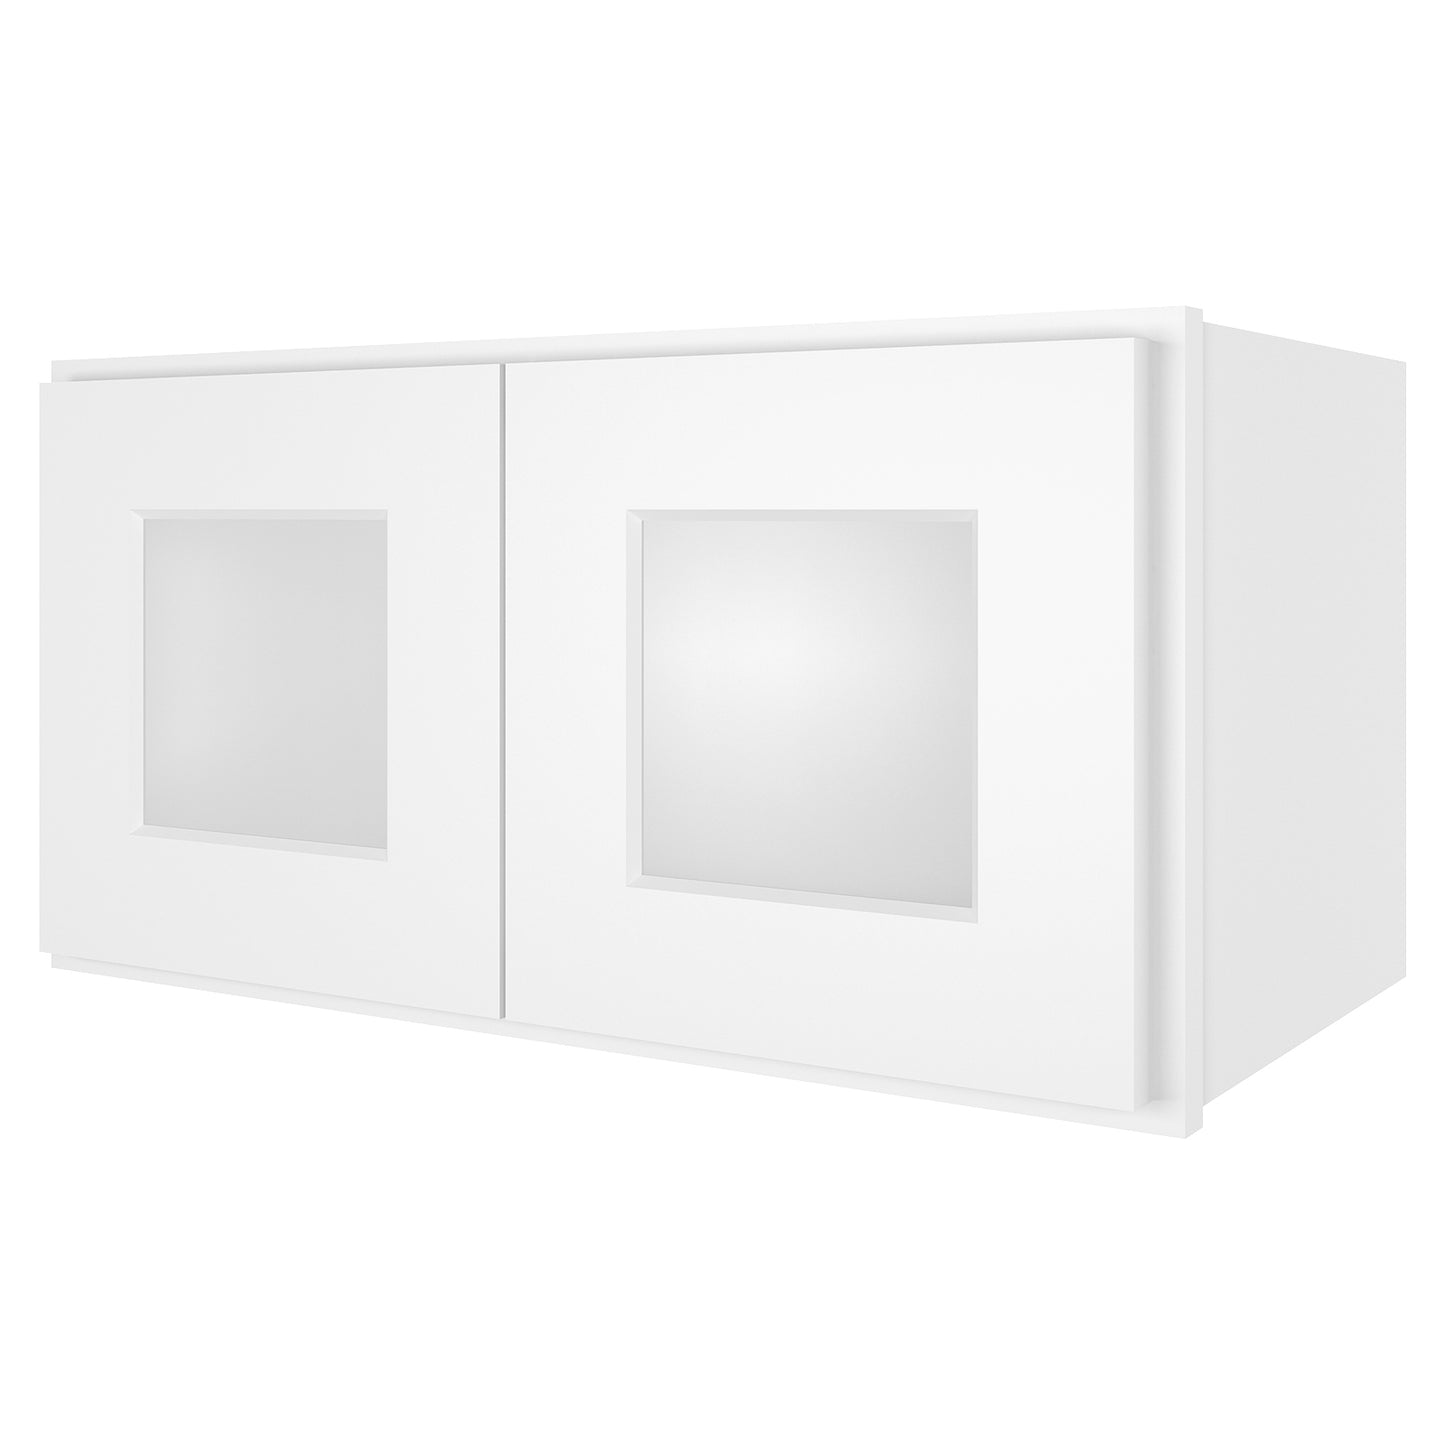 Medicine Cabinet Wall Mounted W2412GD